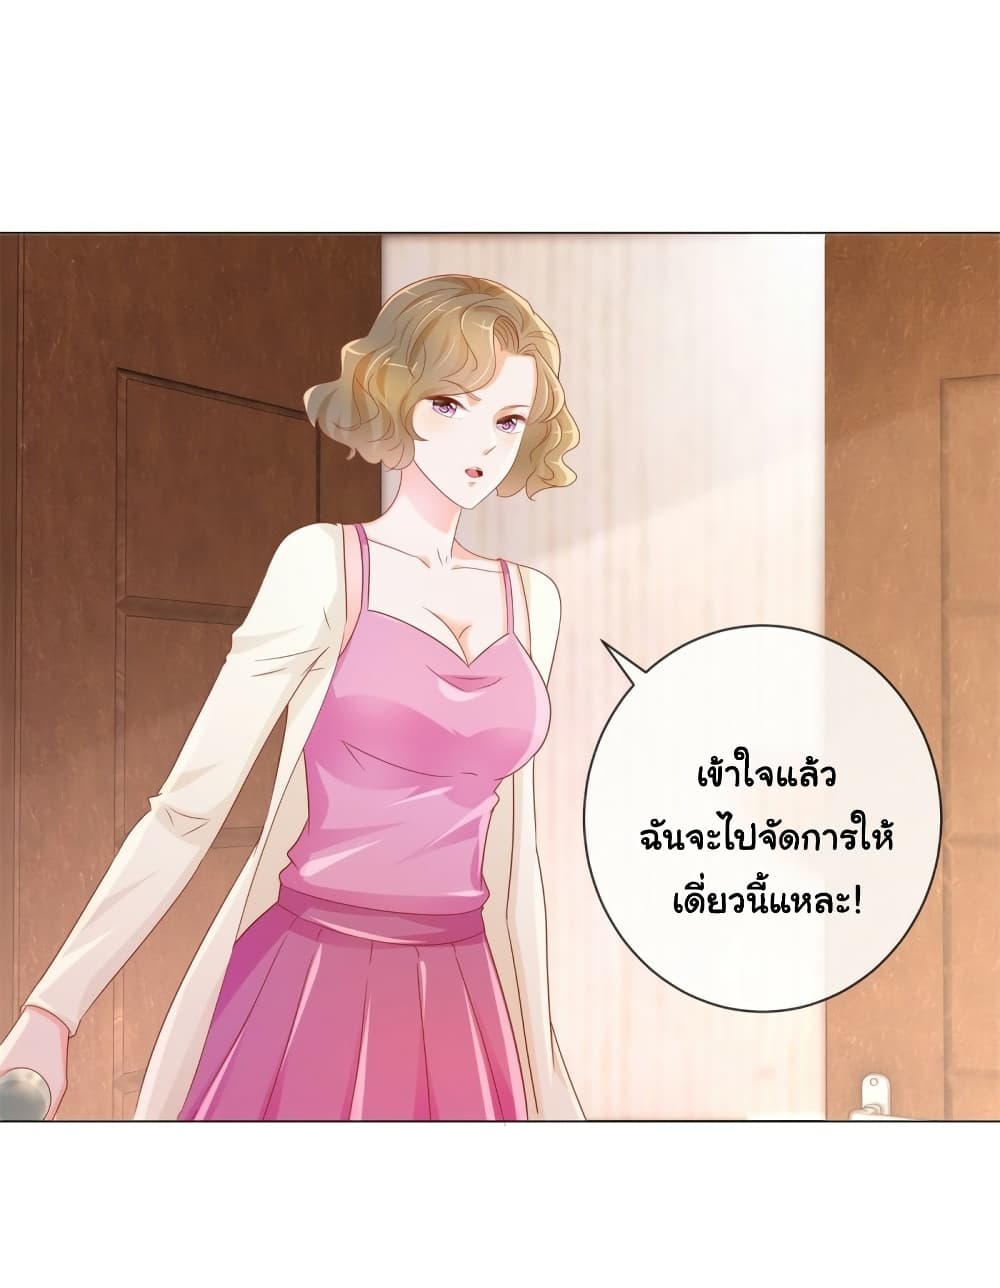 The Lovely Wife And Strange Marriage à¹à¸œà¸™à¸£à¸±à¸à¸¥à¸§à¸‡à¹ƒà¸ˆ 322 (8)